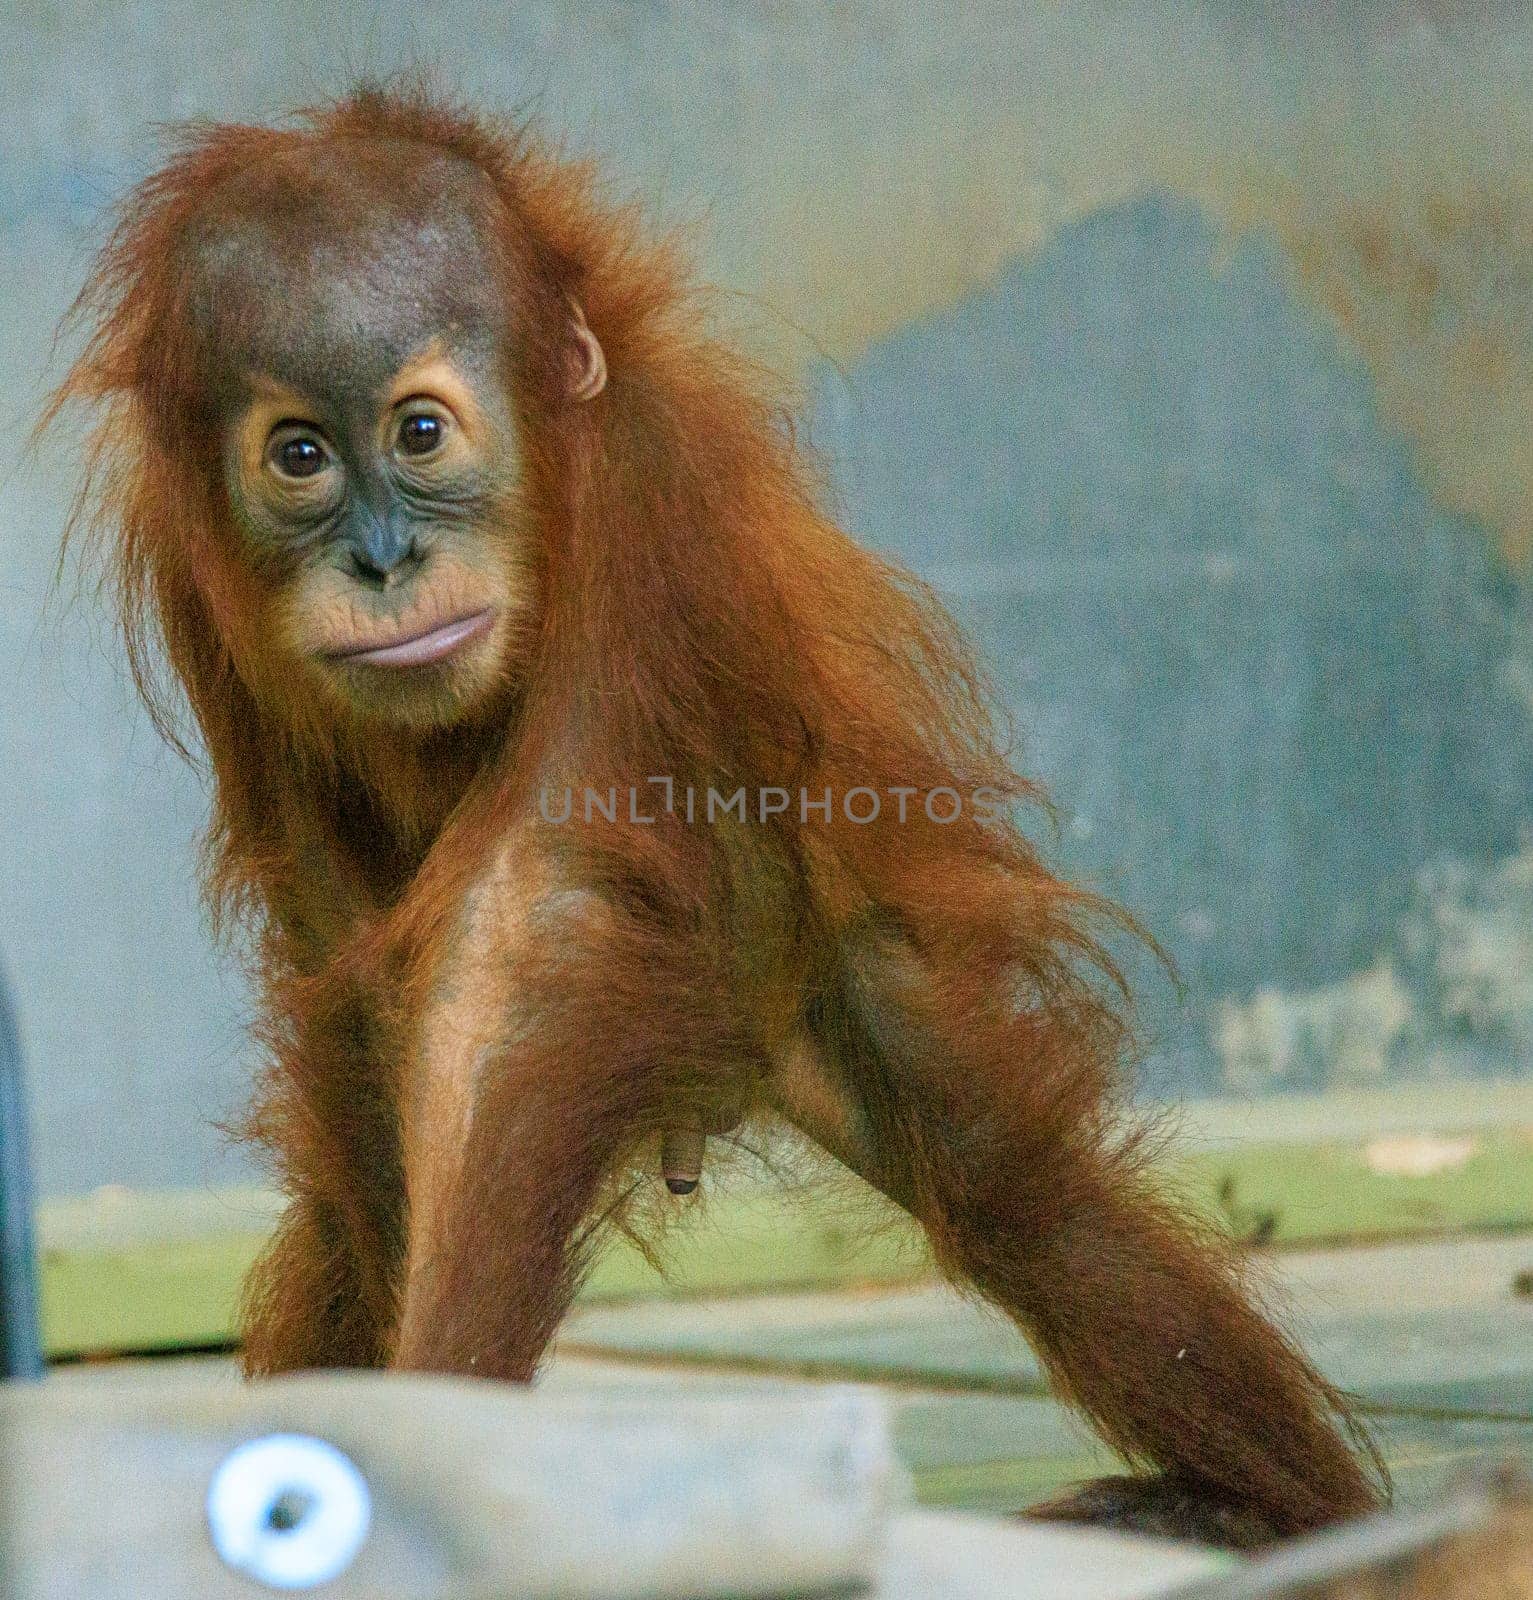 Baby Orangutan Looks Around For Someone to Play With. Mom was totally ignoring him so he wandered about trying everything to have some fun